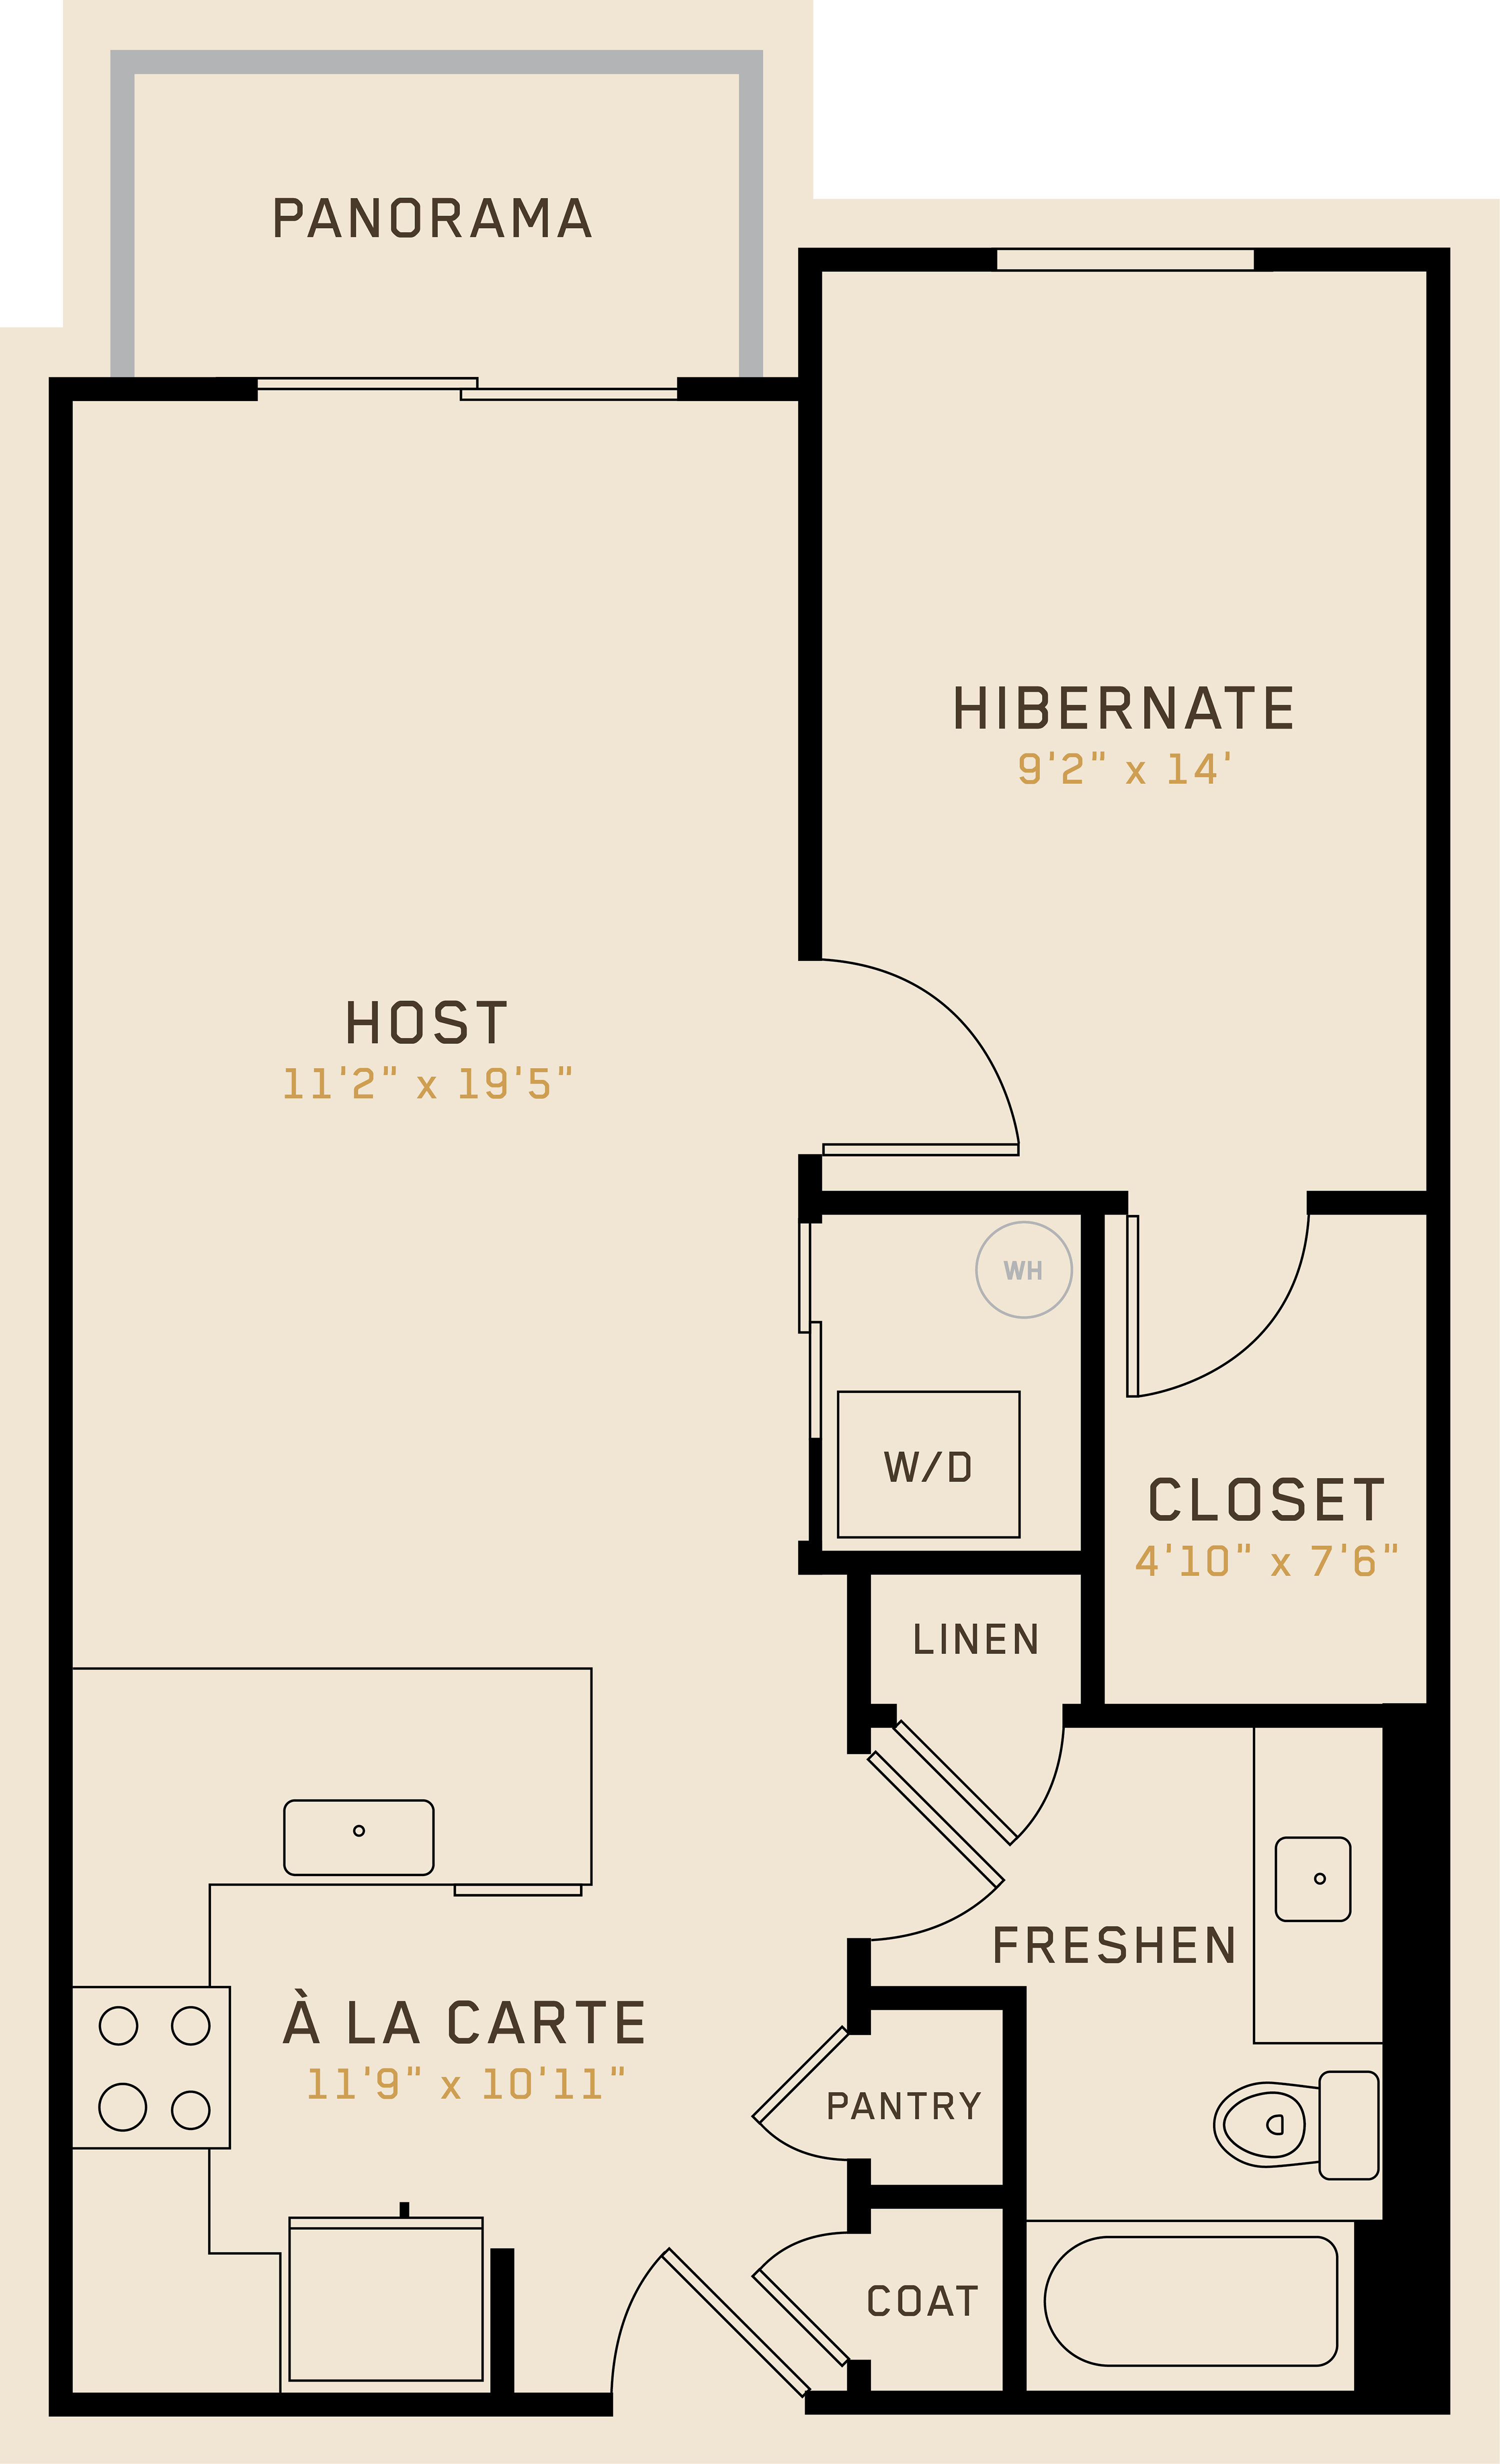 A1J floor plan featuring 1 bedroom, 1 bathroom, and is 695 square feet